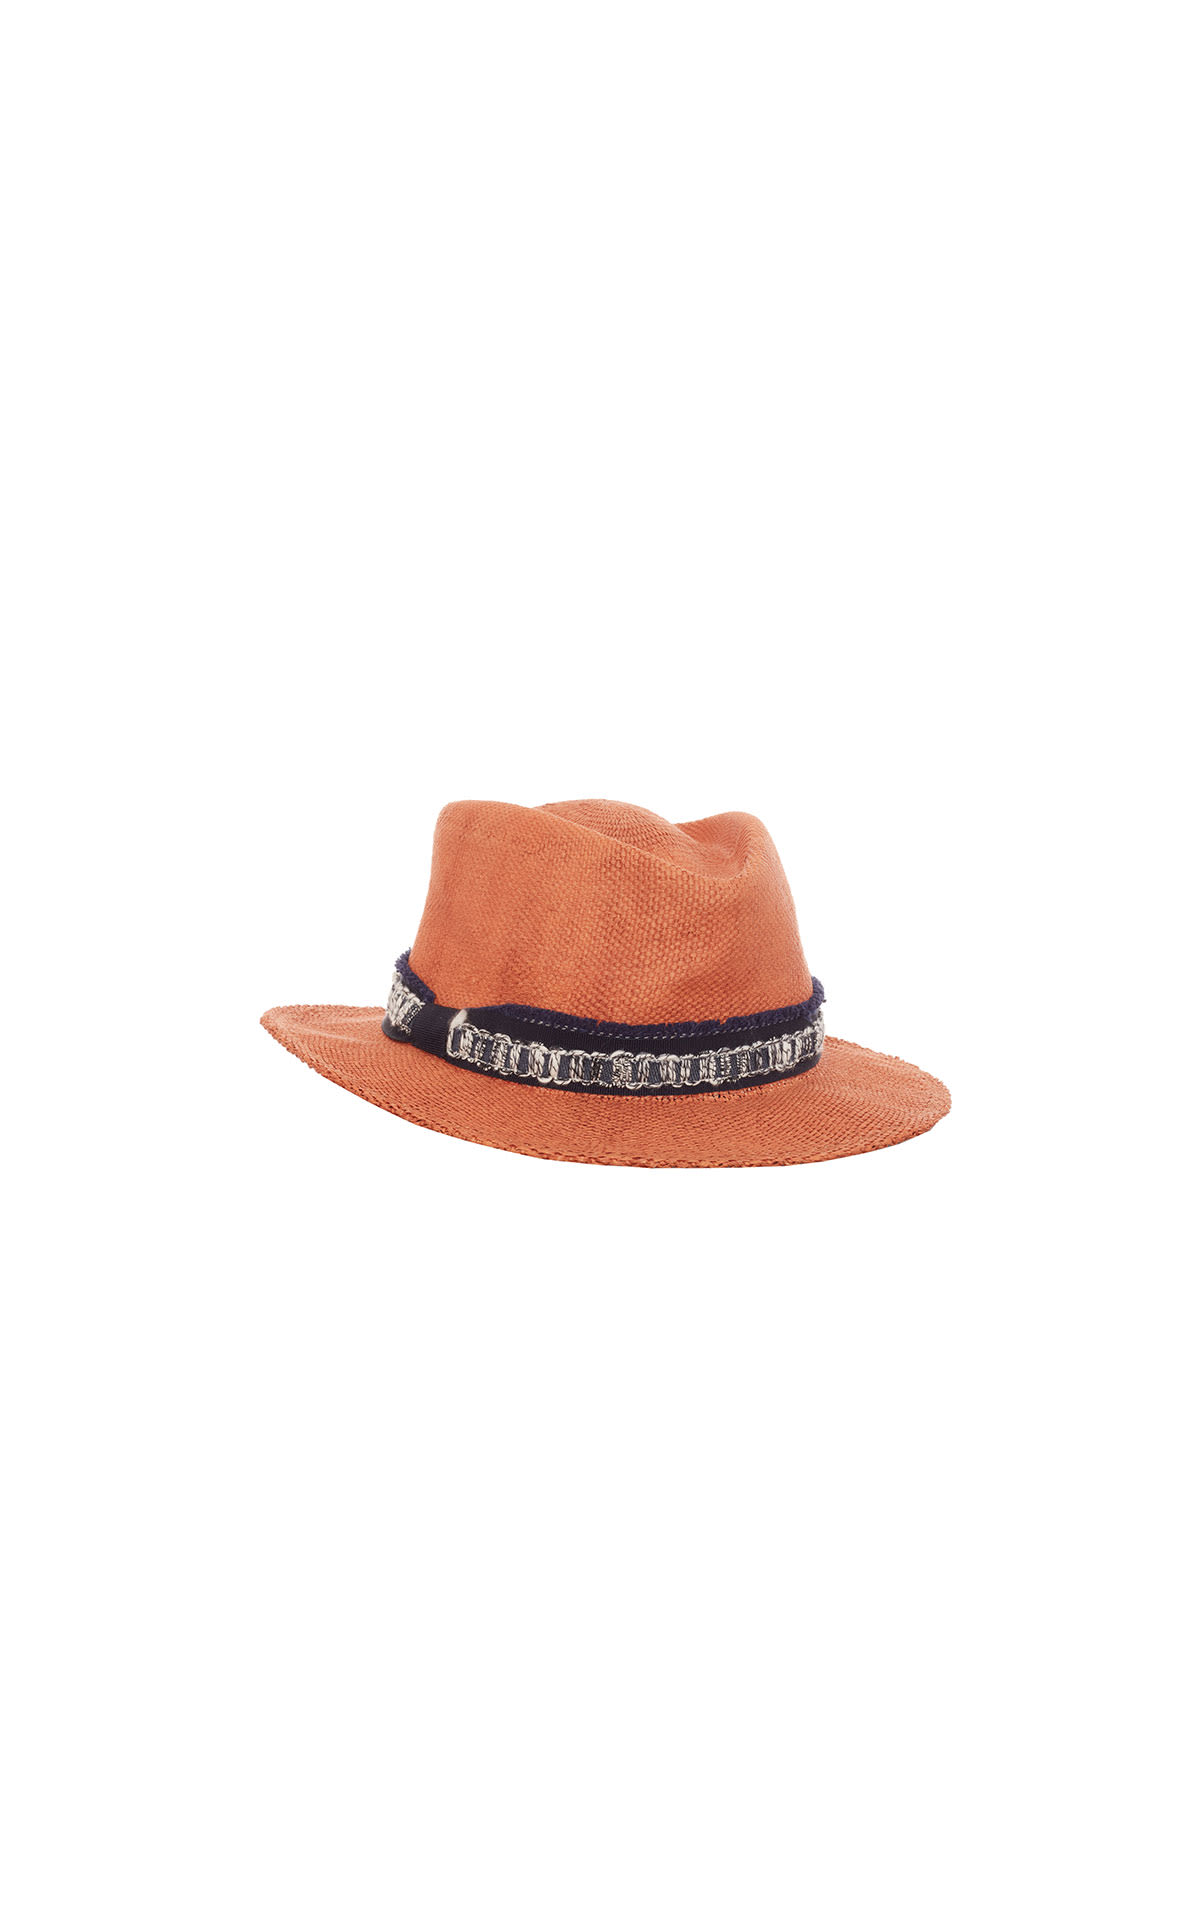 Eleventy Panama hat from Bicester Village